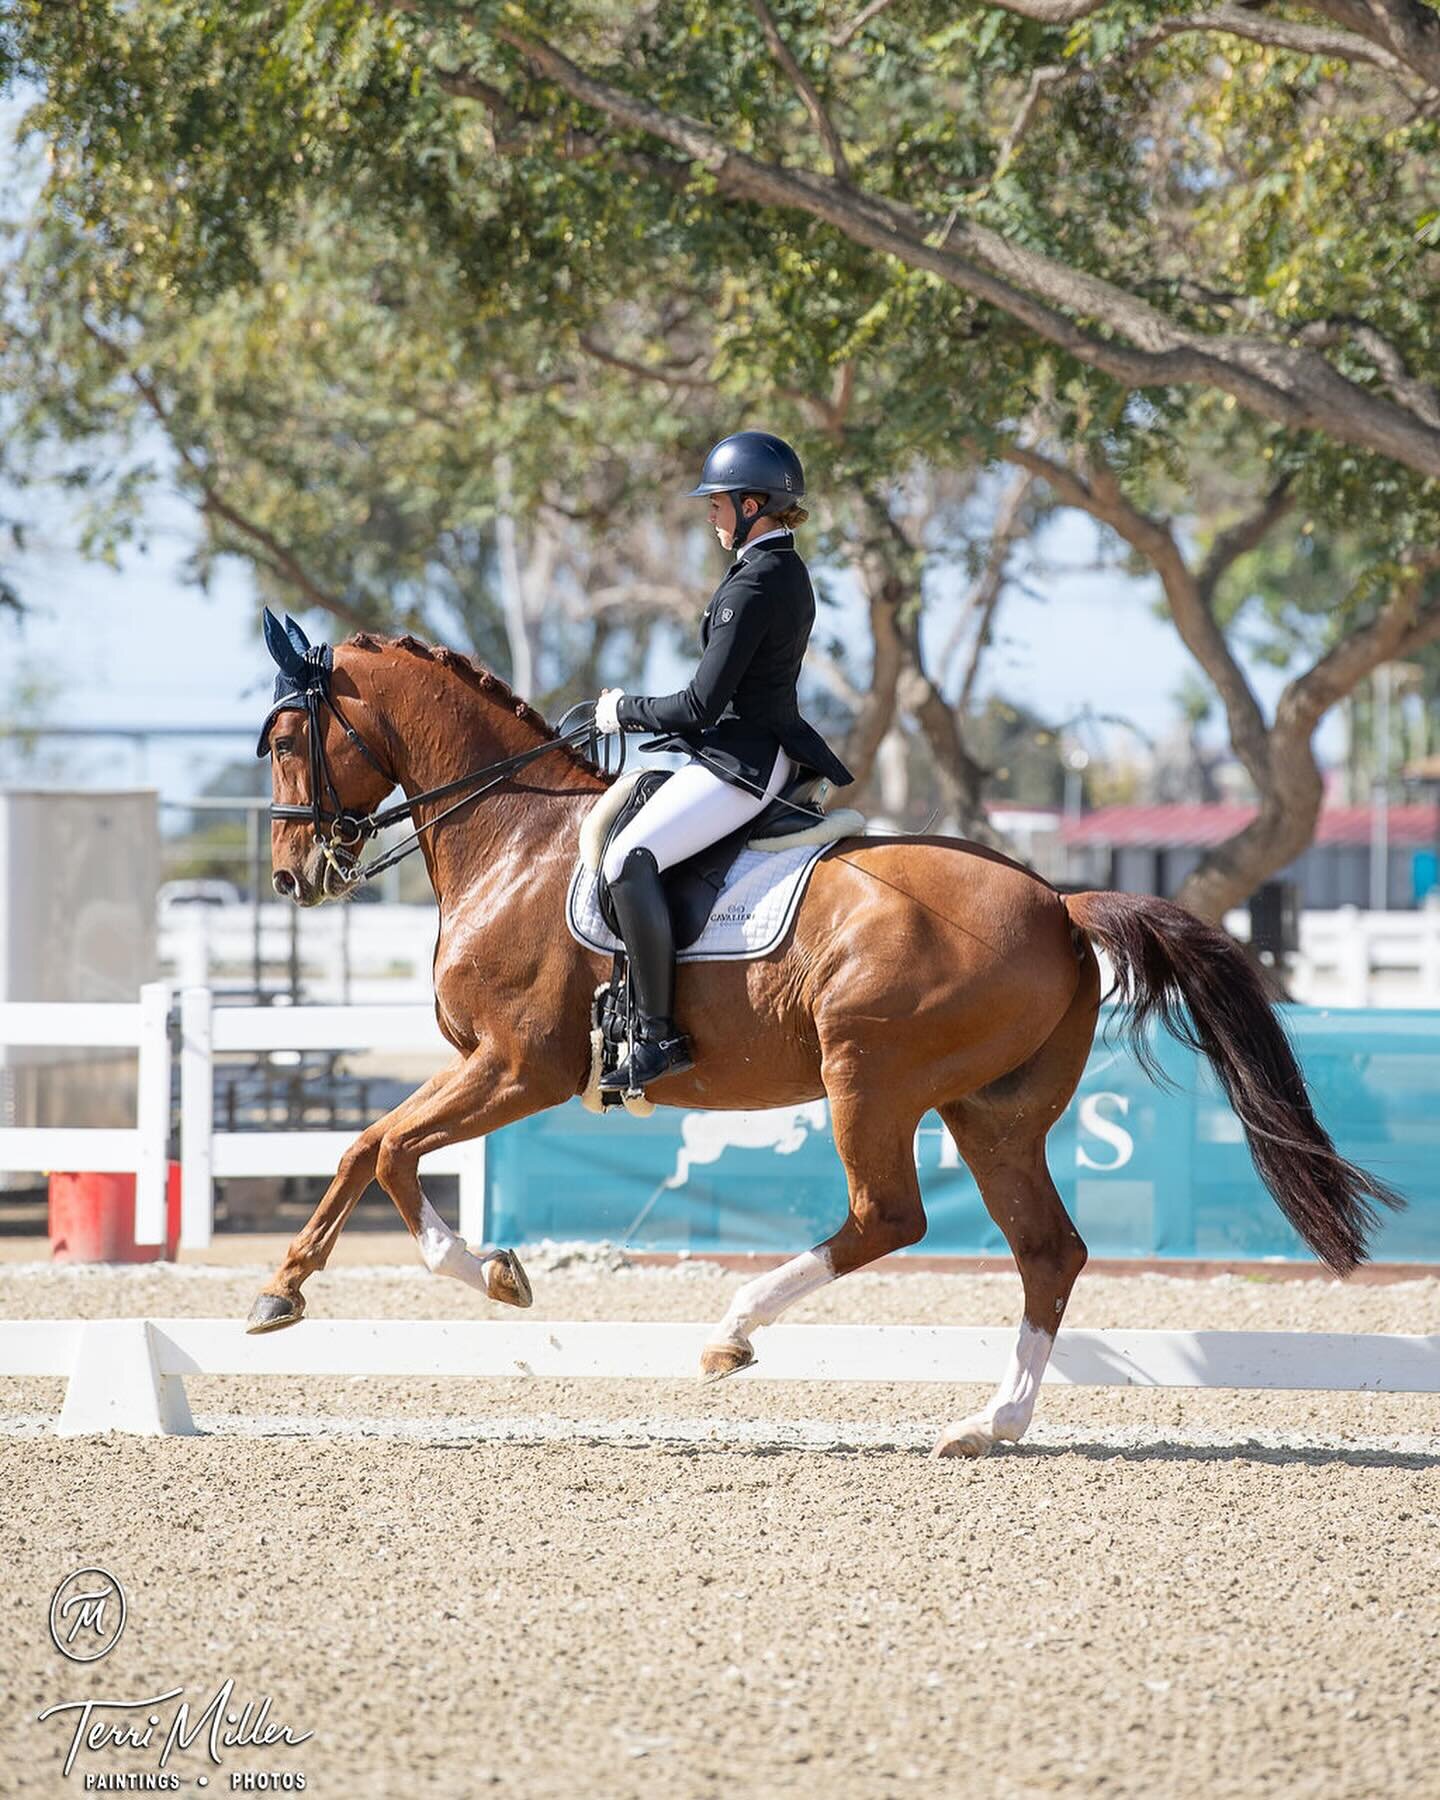 Few more the first HITS Del Mar Show of the season&hellip; thankful for the reopening of such a nice facility so close to us at @arroyodelmar ! 
.
.
.
. @trilogy_saddles @cavalierecouture 
. #frantz #exclusivedressageimports #dressage #showpark #hors